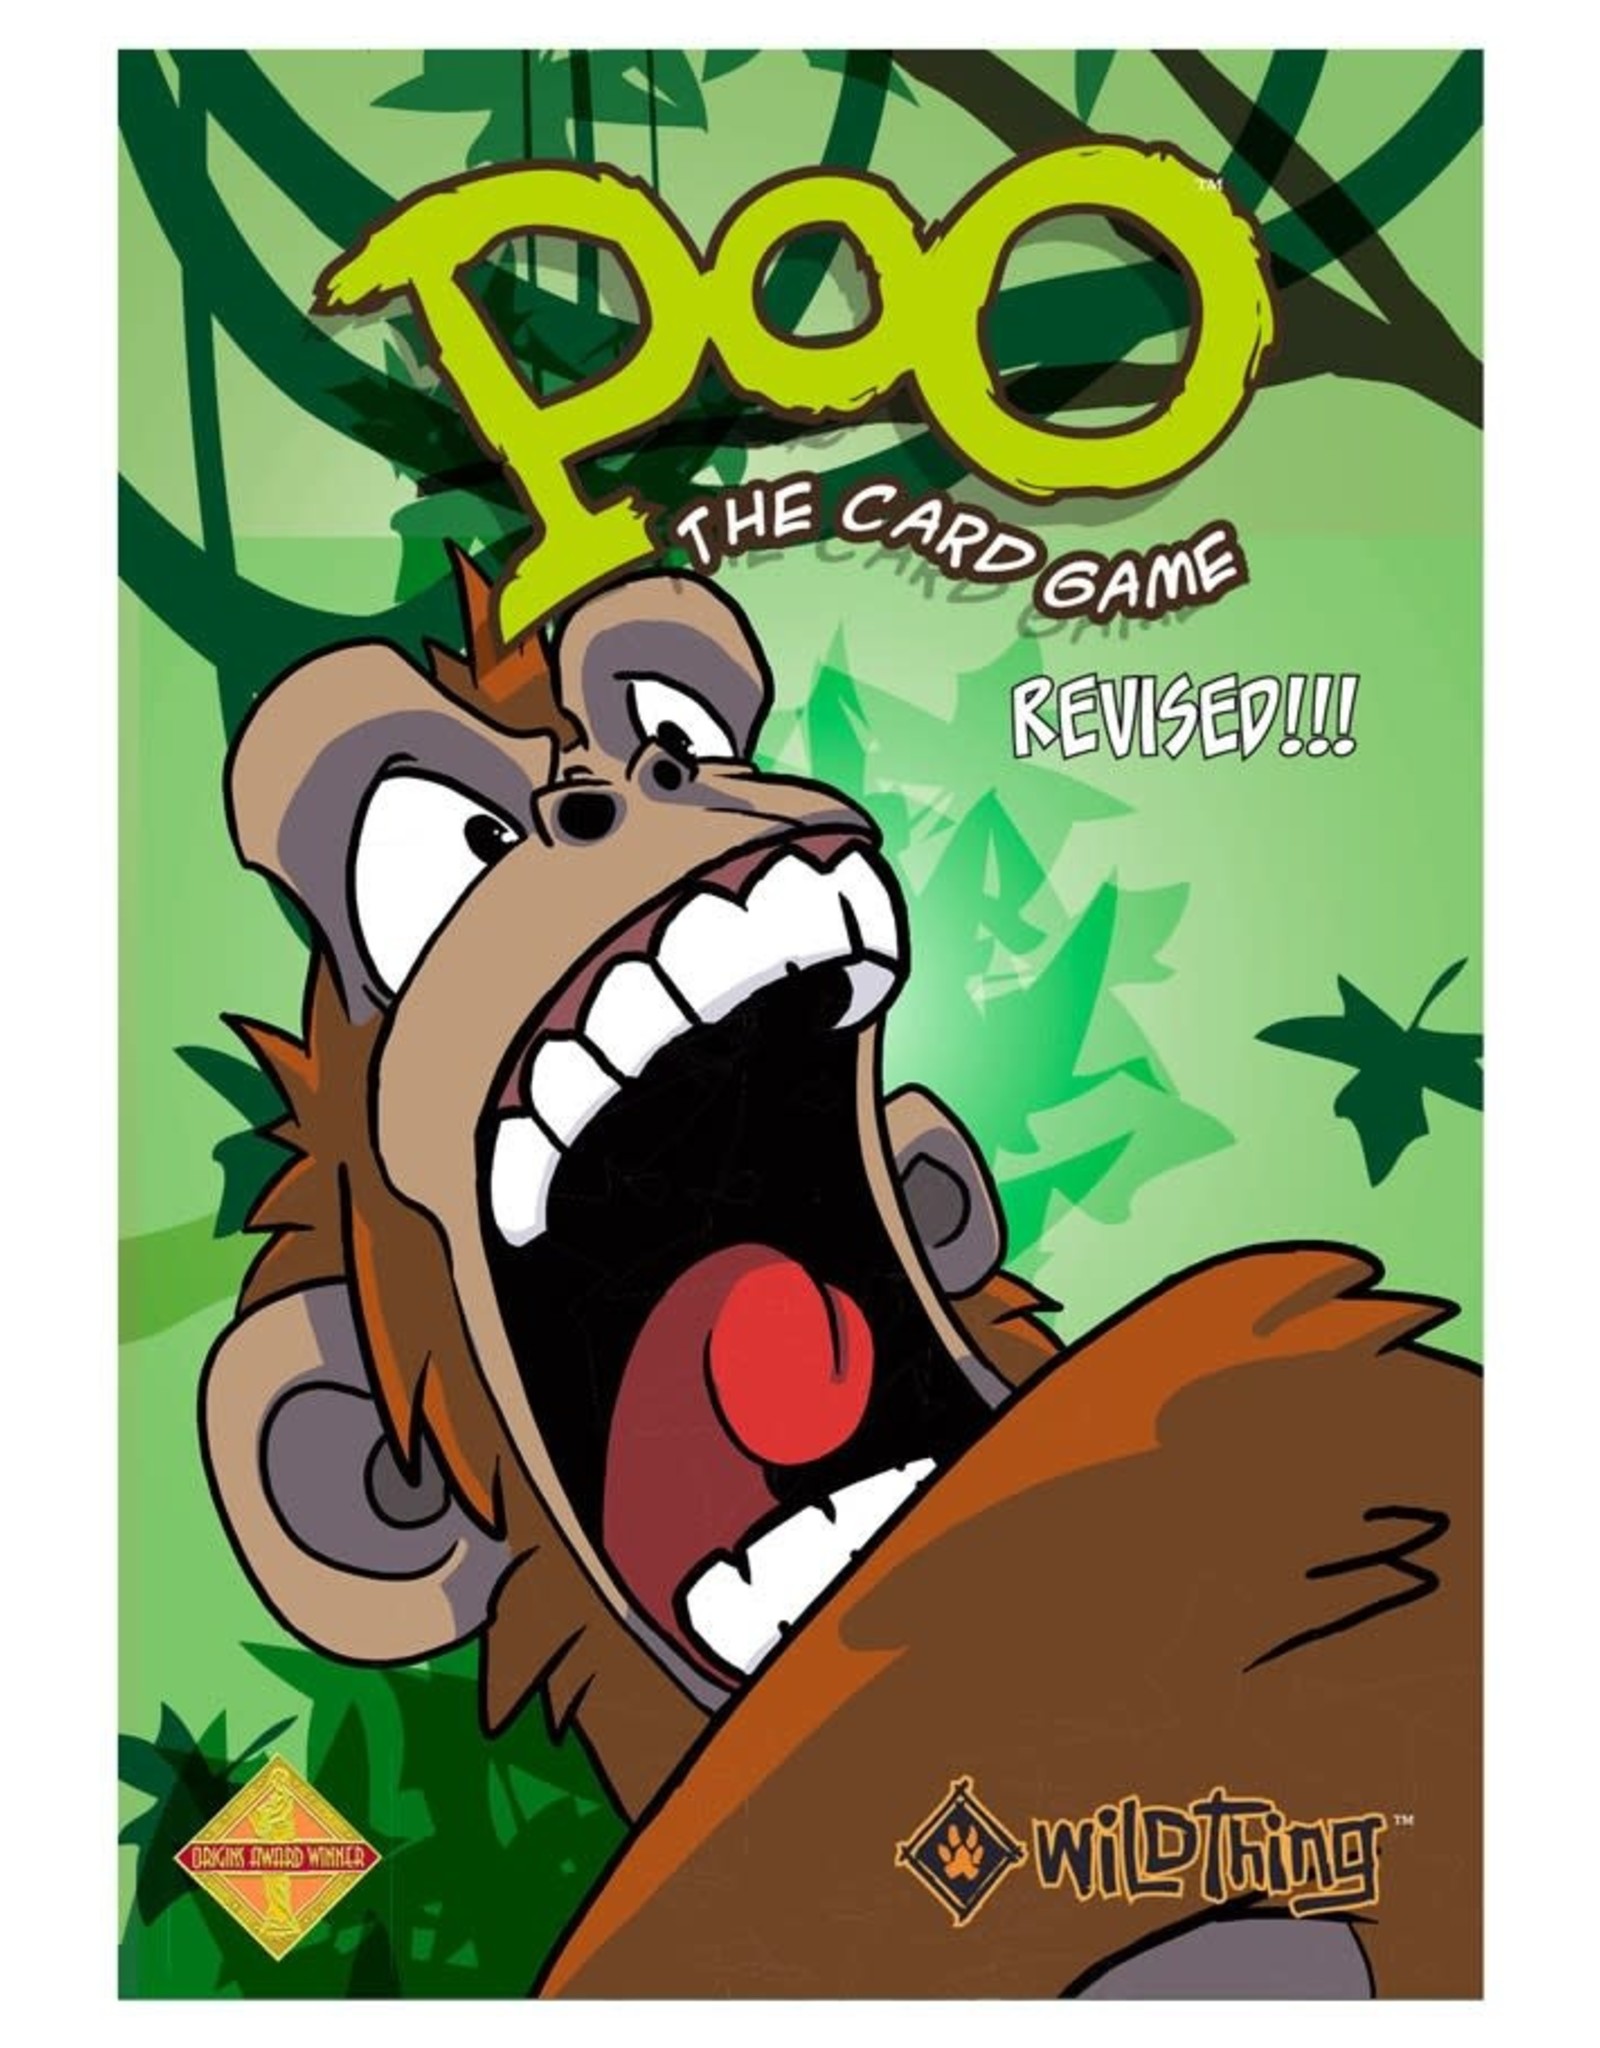 Misc Poo Card Game